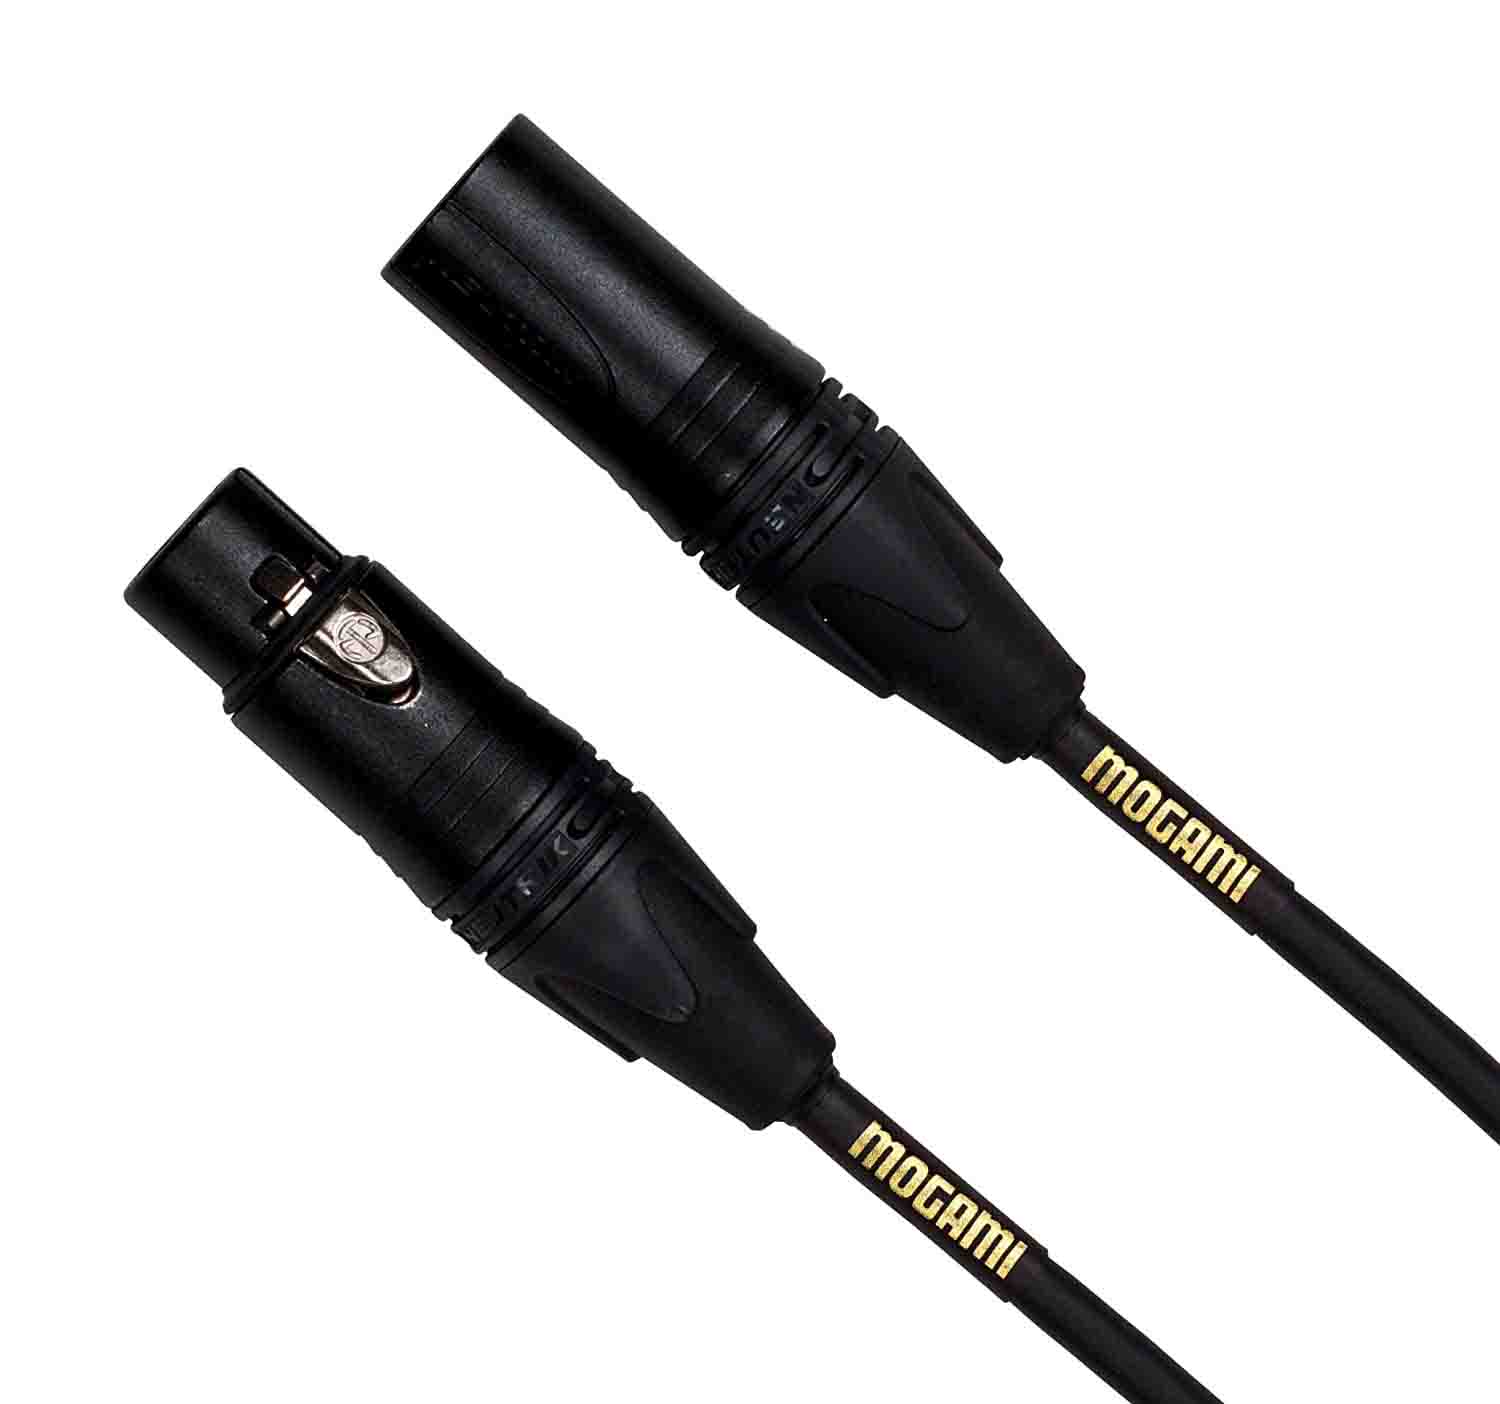 Mogami GOLD STAGE-20, 3-Pin XLR Male to XLR Female Mic Cable - 20 Foot - Hollywood DJ